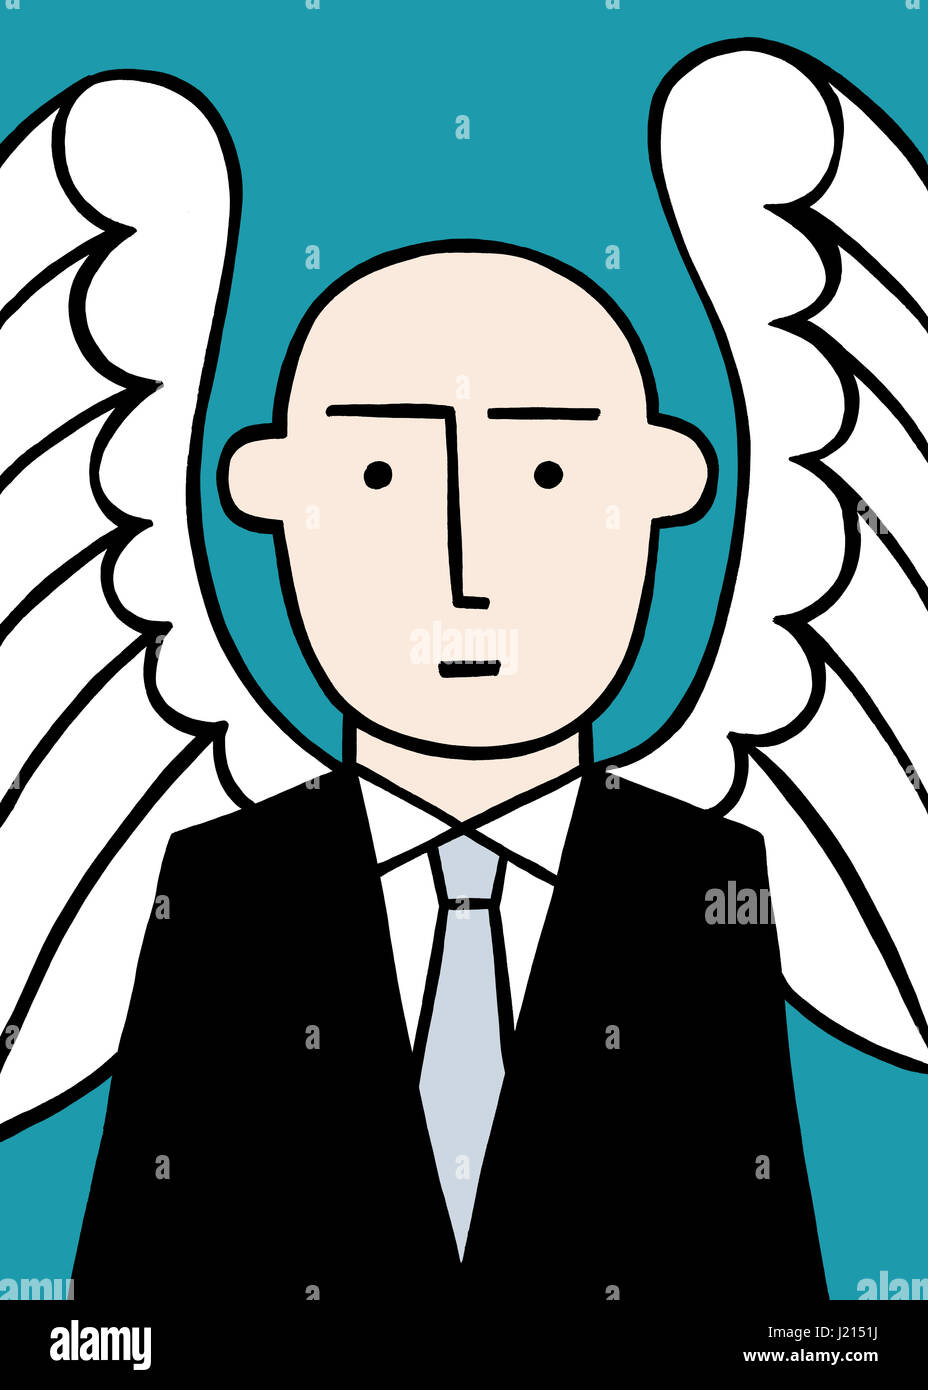 Business angel. A business illustration about thinking different thoughts. Stock Photo